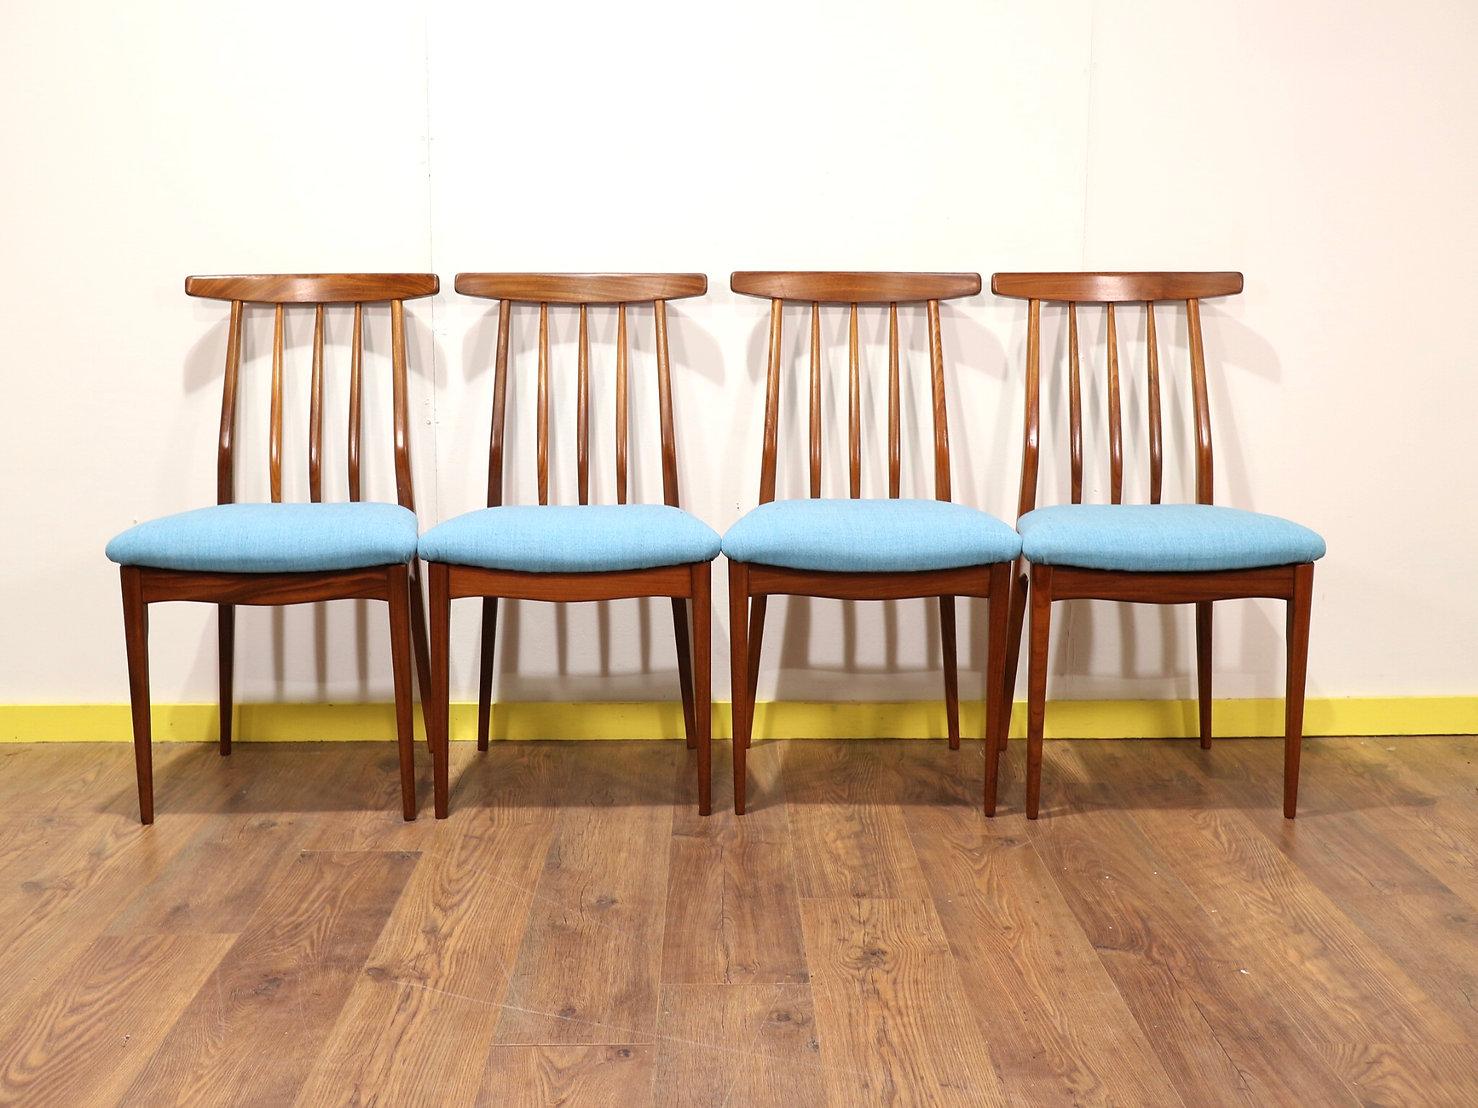 A really stunning set of 6 dining chairs made by British furniture maker A . Younger in the 1960s. The set includes 2 carver chairs and 4 standard back chairs, they have been recently upholstered in blue these dining chairs would look fantastic